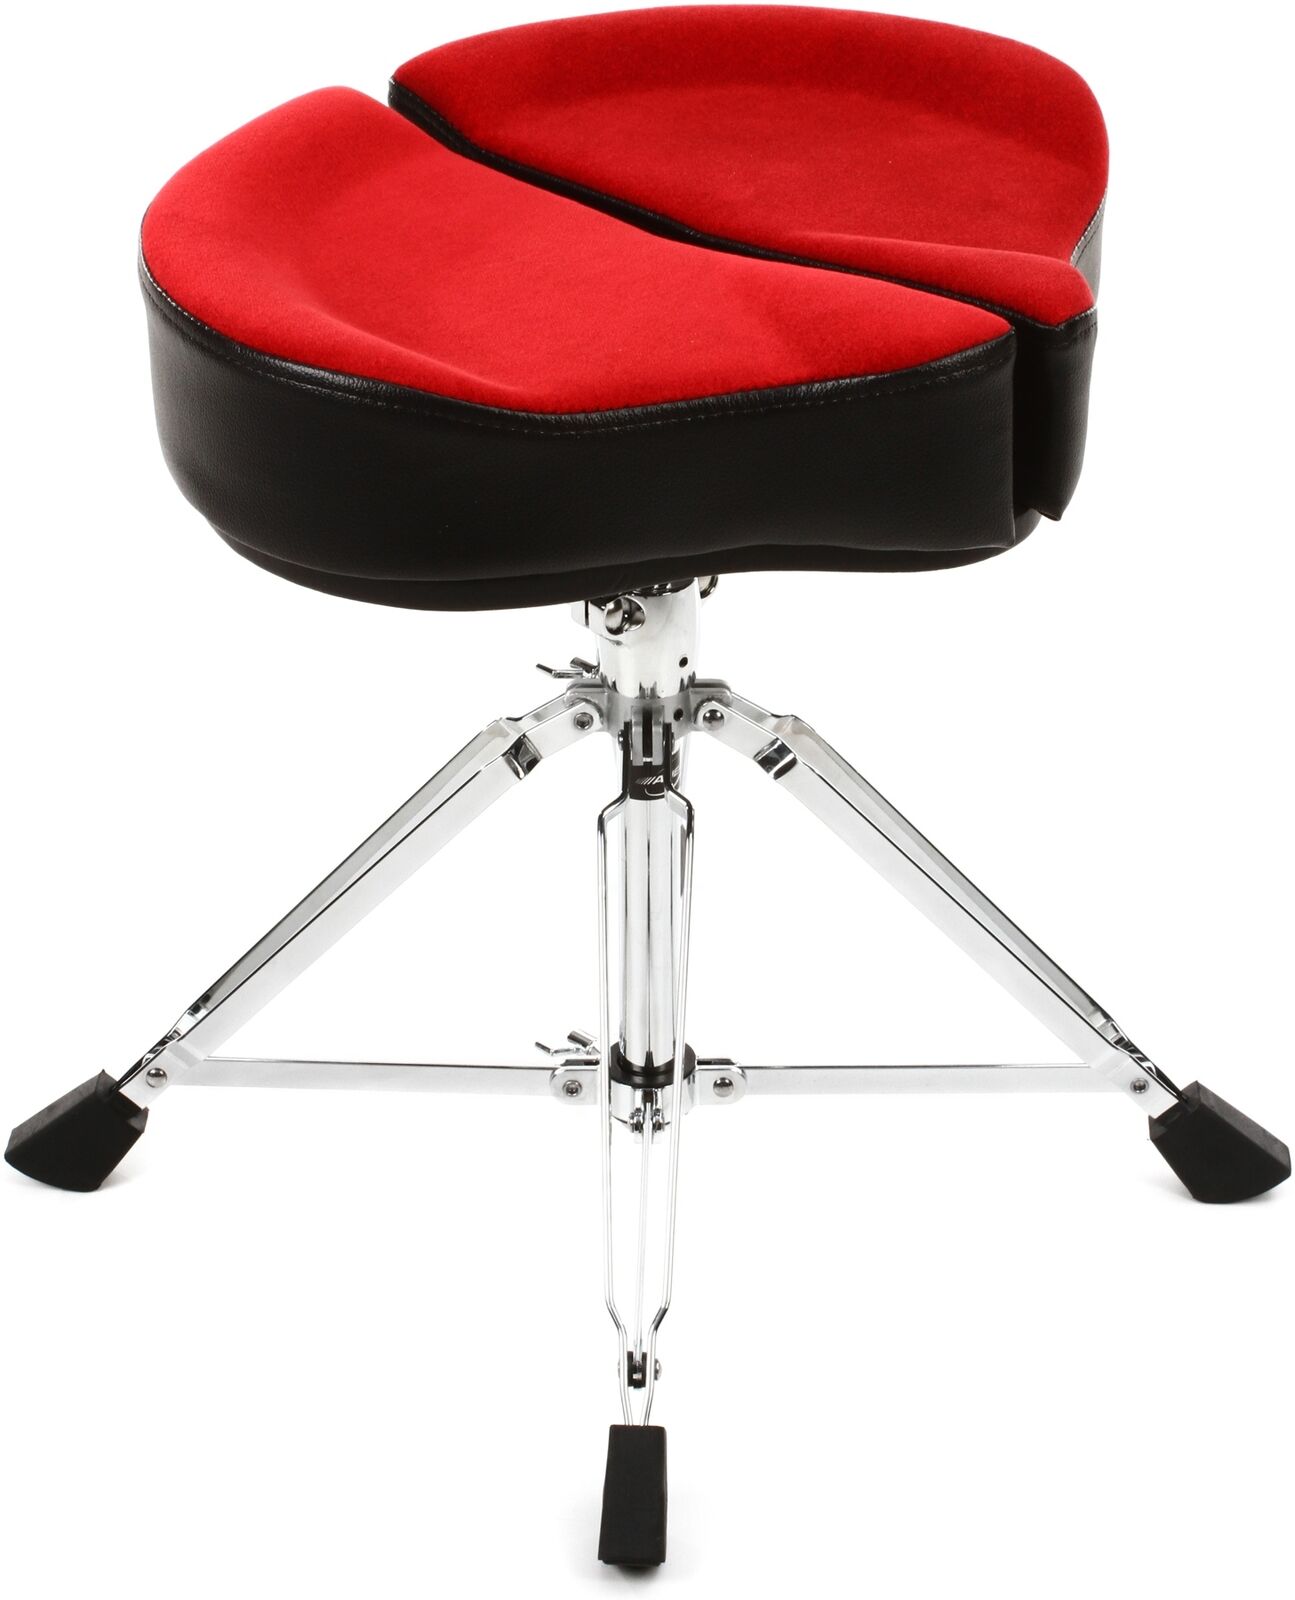 Ahead Spinal-G Saddle Throne - Red